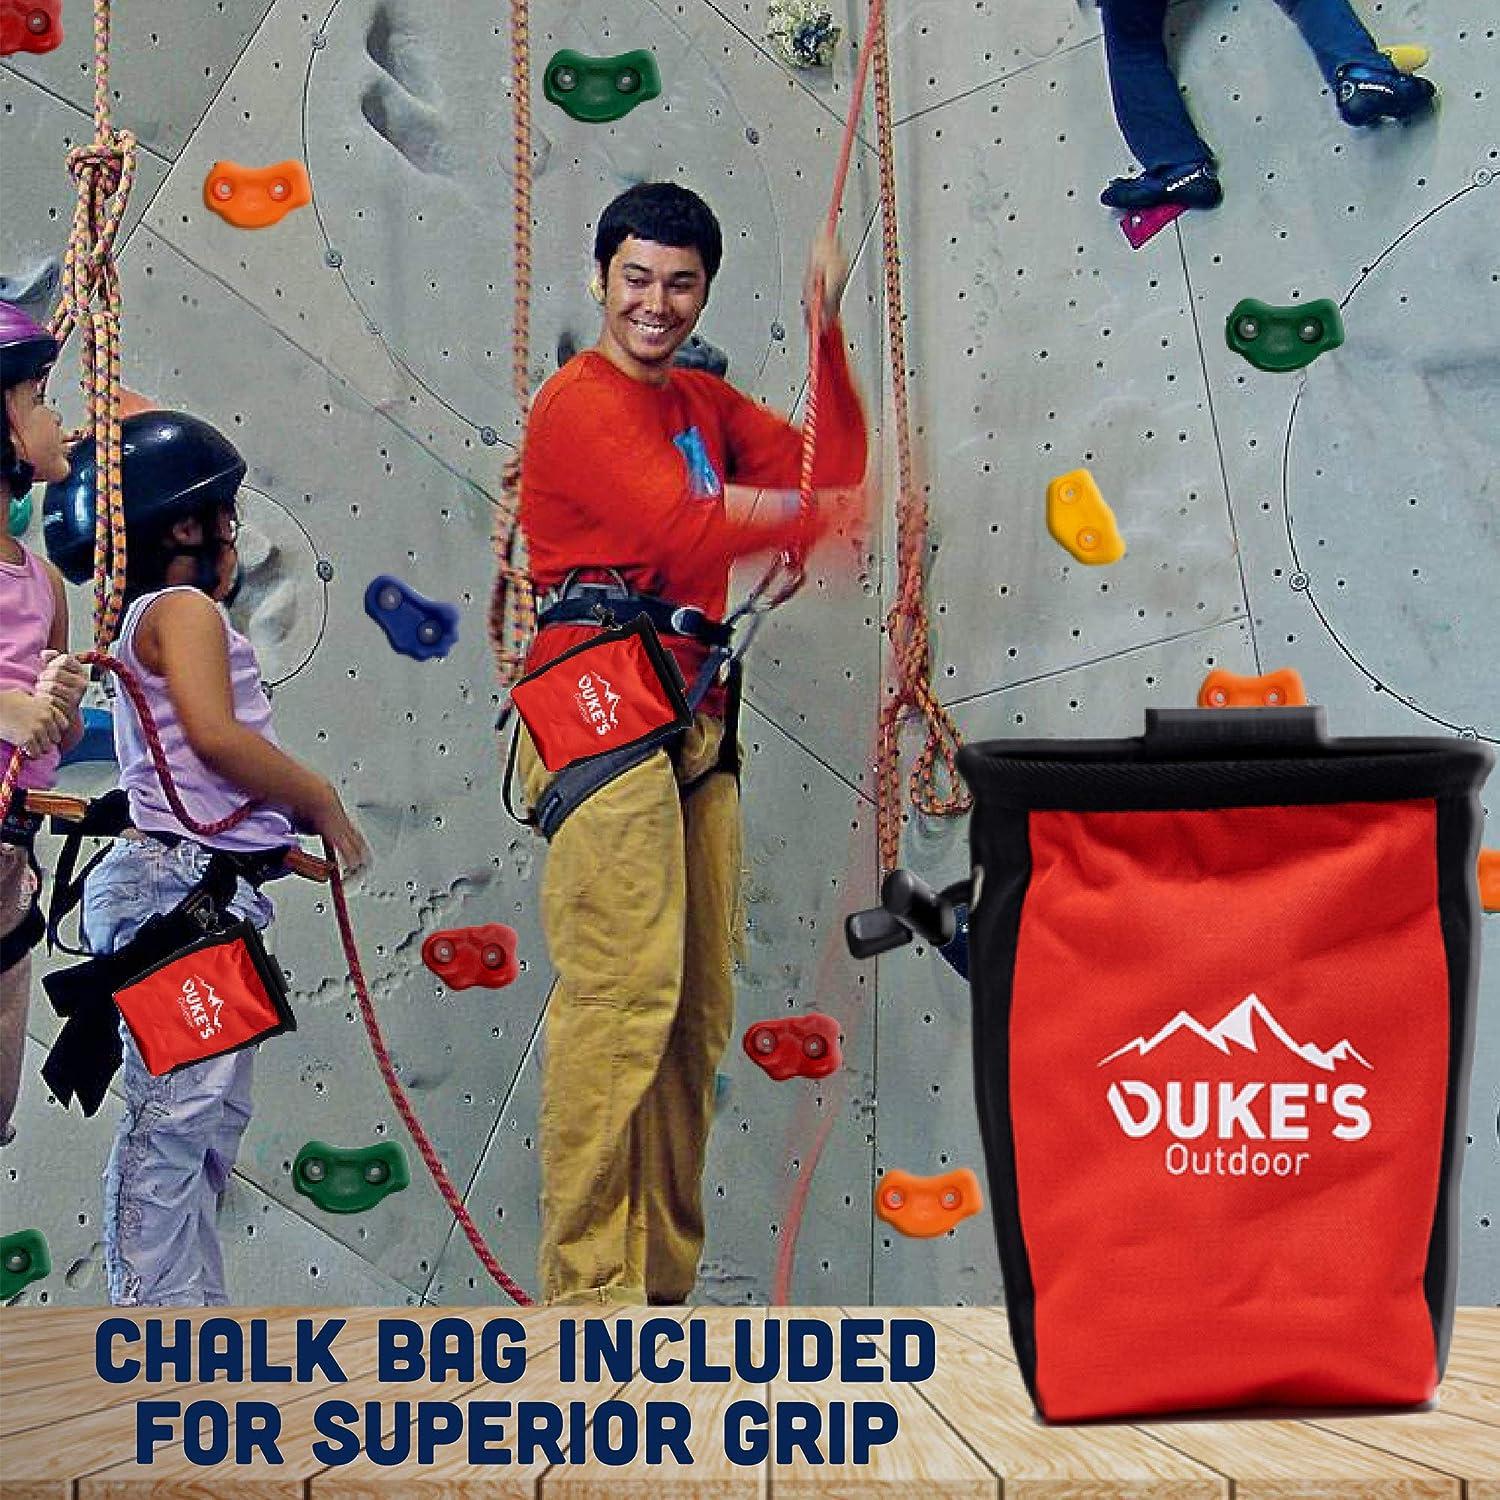 Duke's Outdoor Rock Climbing Holds Set for Kids - 30 Rock Climbing Wall  Grips for Indoor & Outdoor Play Set, 8 Foot Knotted Climbing Rope, Chalk Bag  & 3 DIY Videos